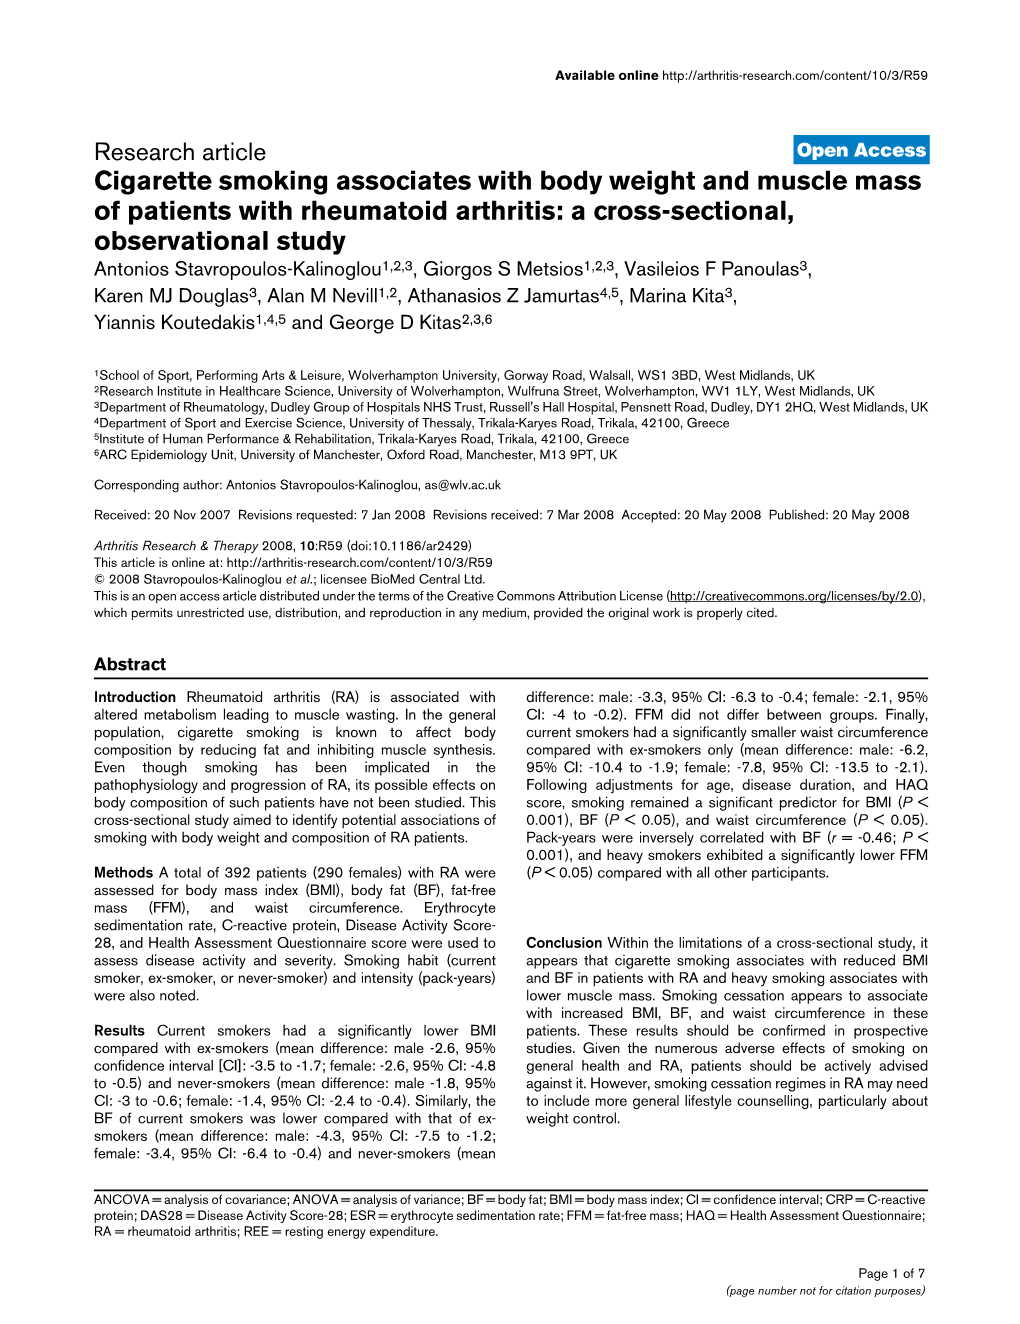 Cigarette Smoking Associates with Body Weight and Muscle Mass Of